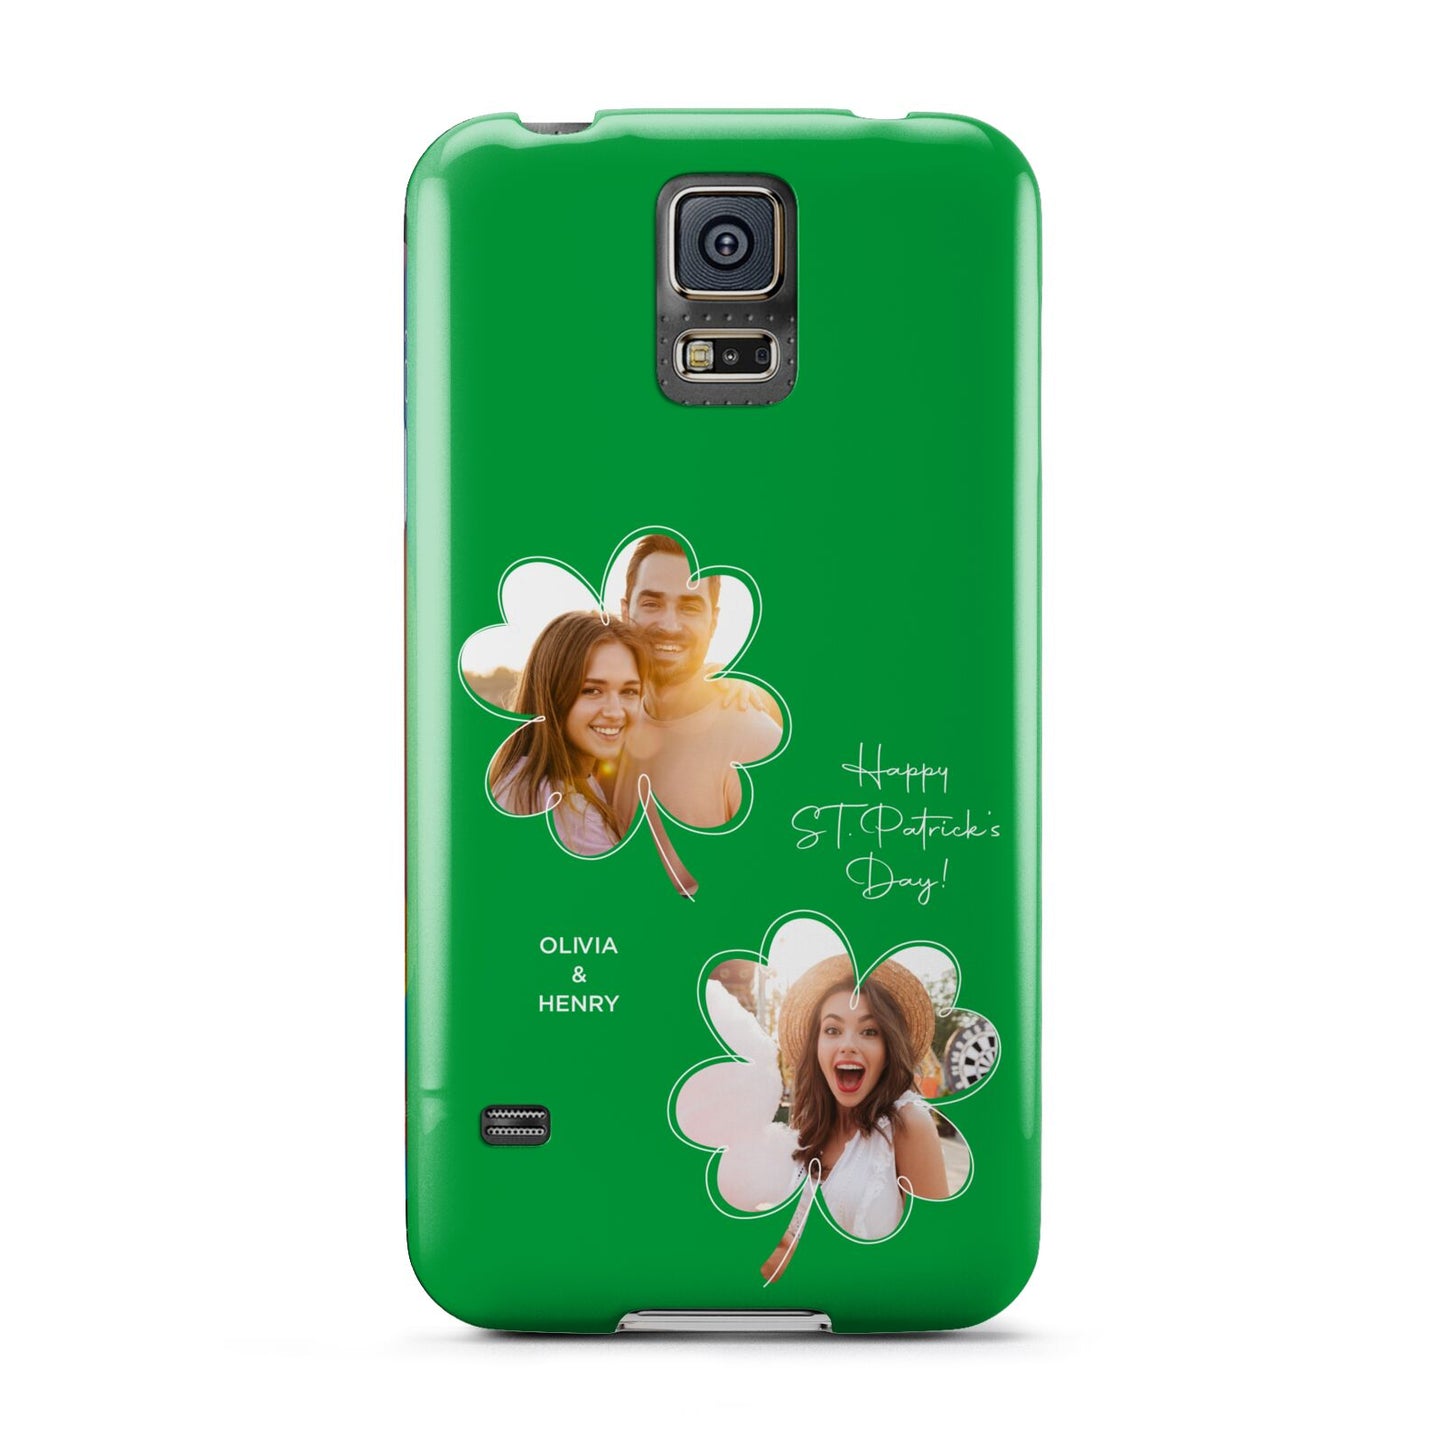 Personalised Photo St Patricks Day Samsung Galaxy S5 Case